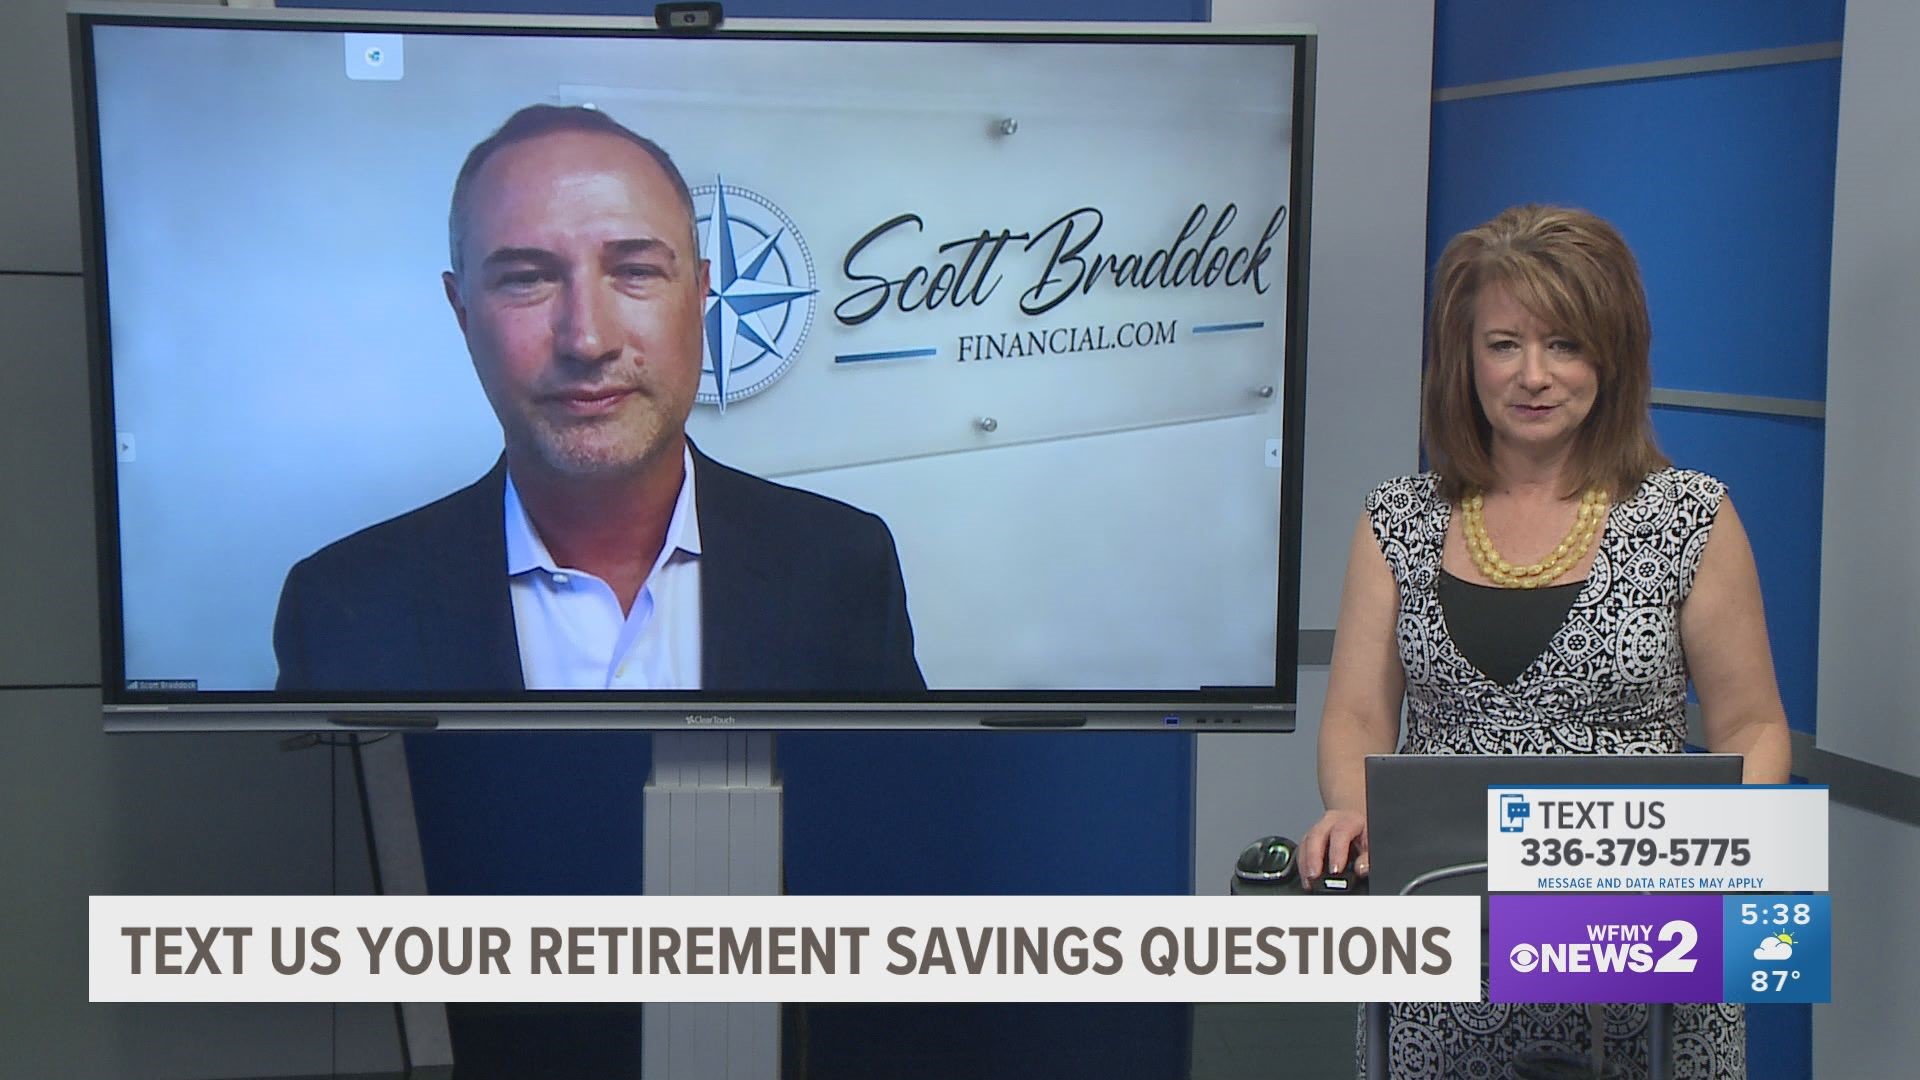 Scott Braddocks explains why an IRA account is good for some, but not others